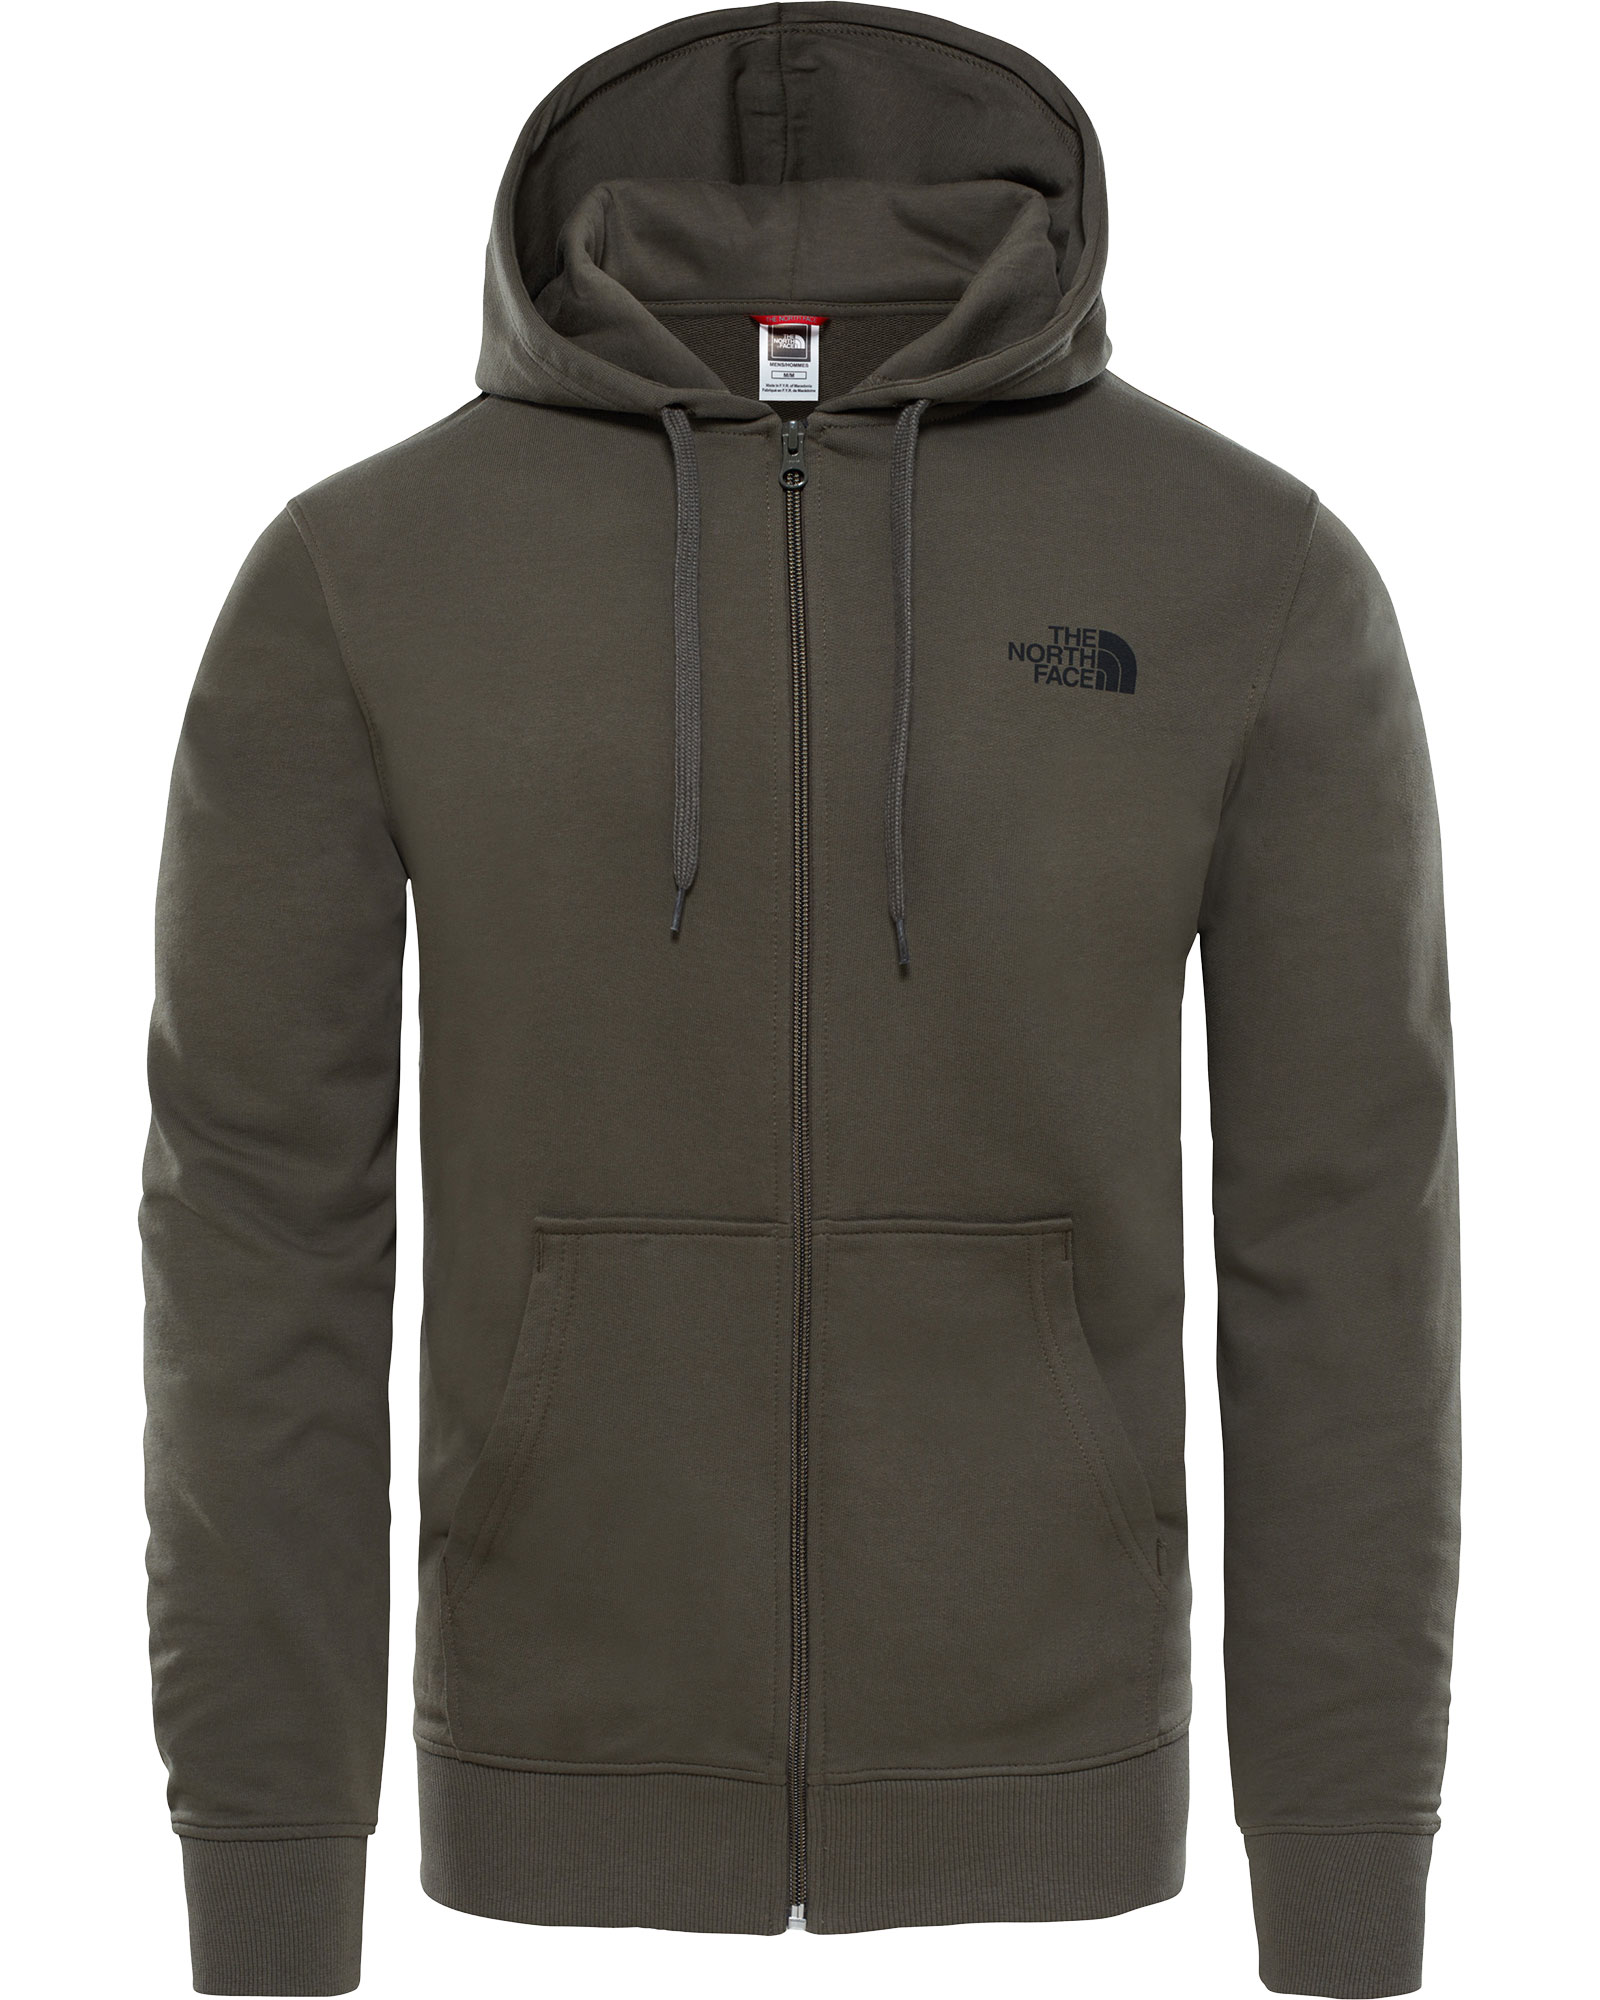 The North Face Open Gate Men’s Full Zip Hoodie - New Taupe Green S